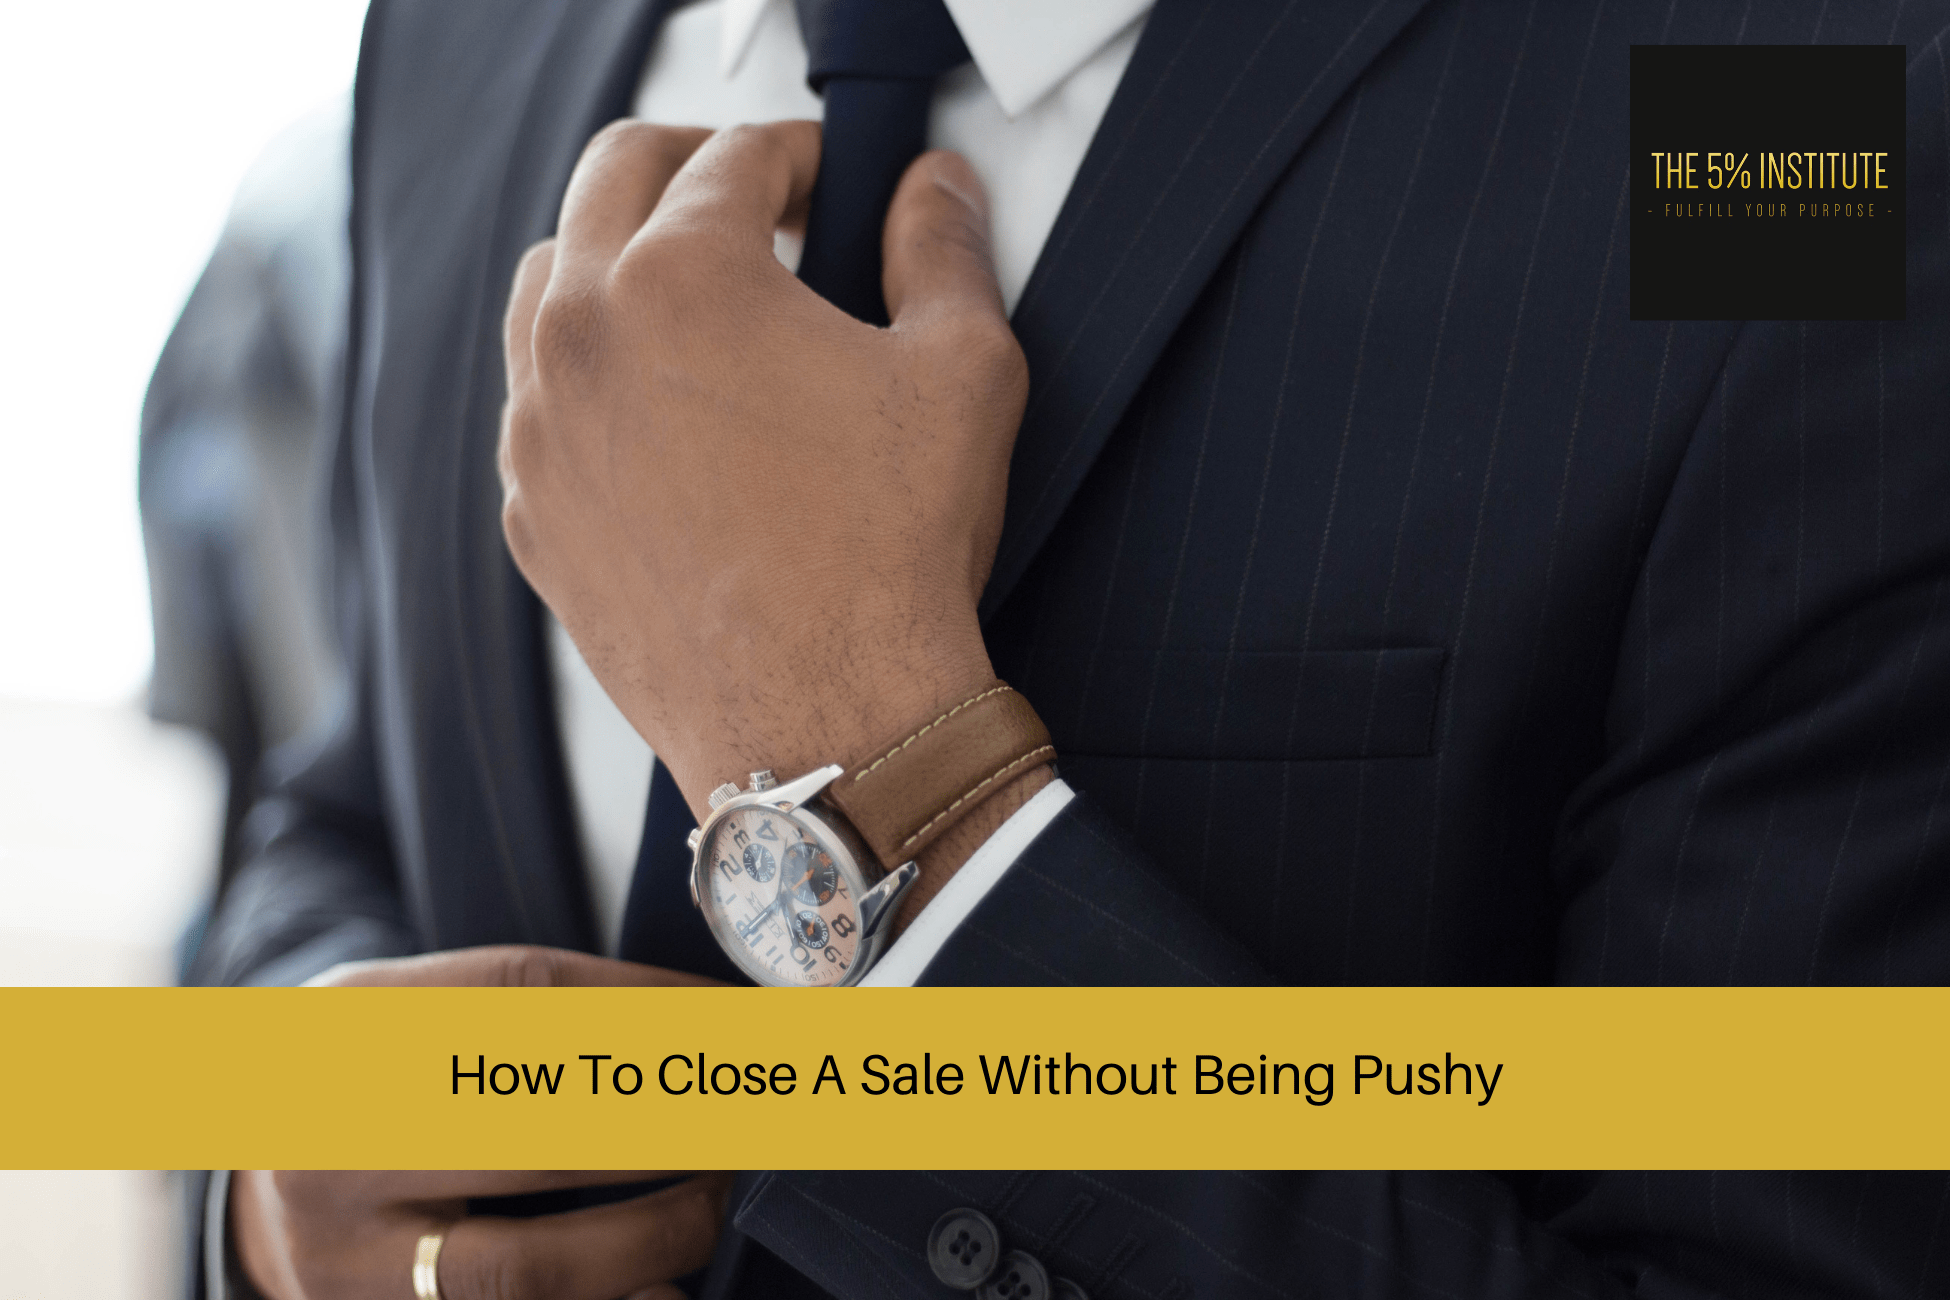 How To Close A Sale Without Being Pushy